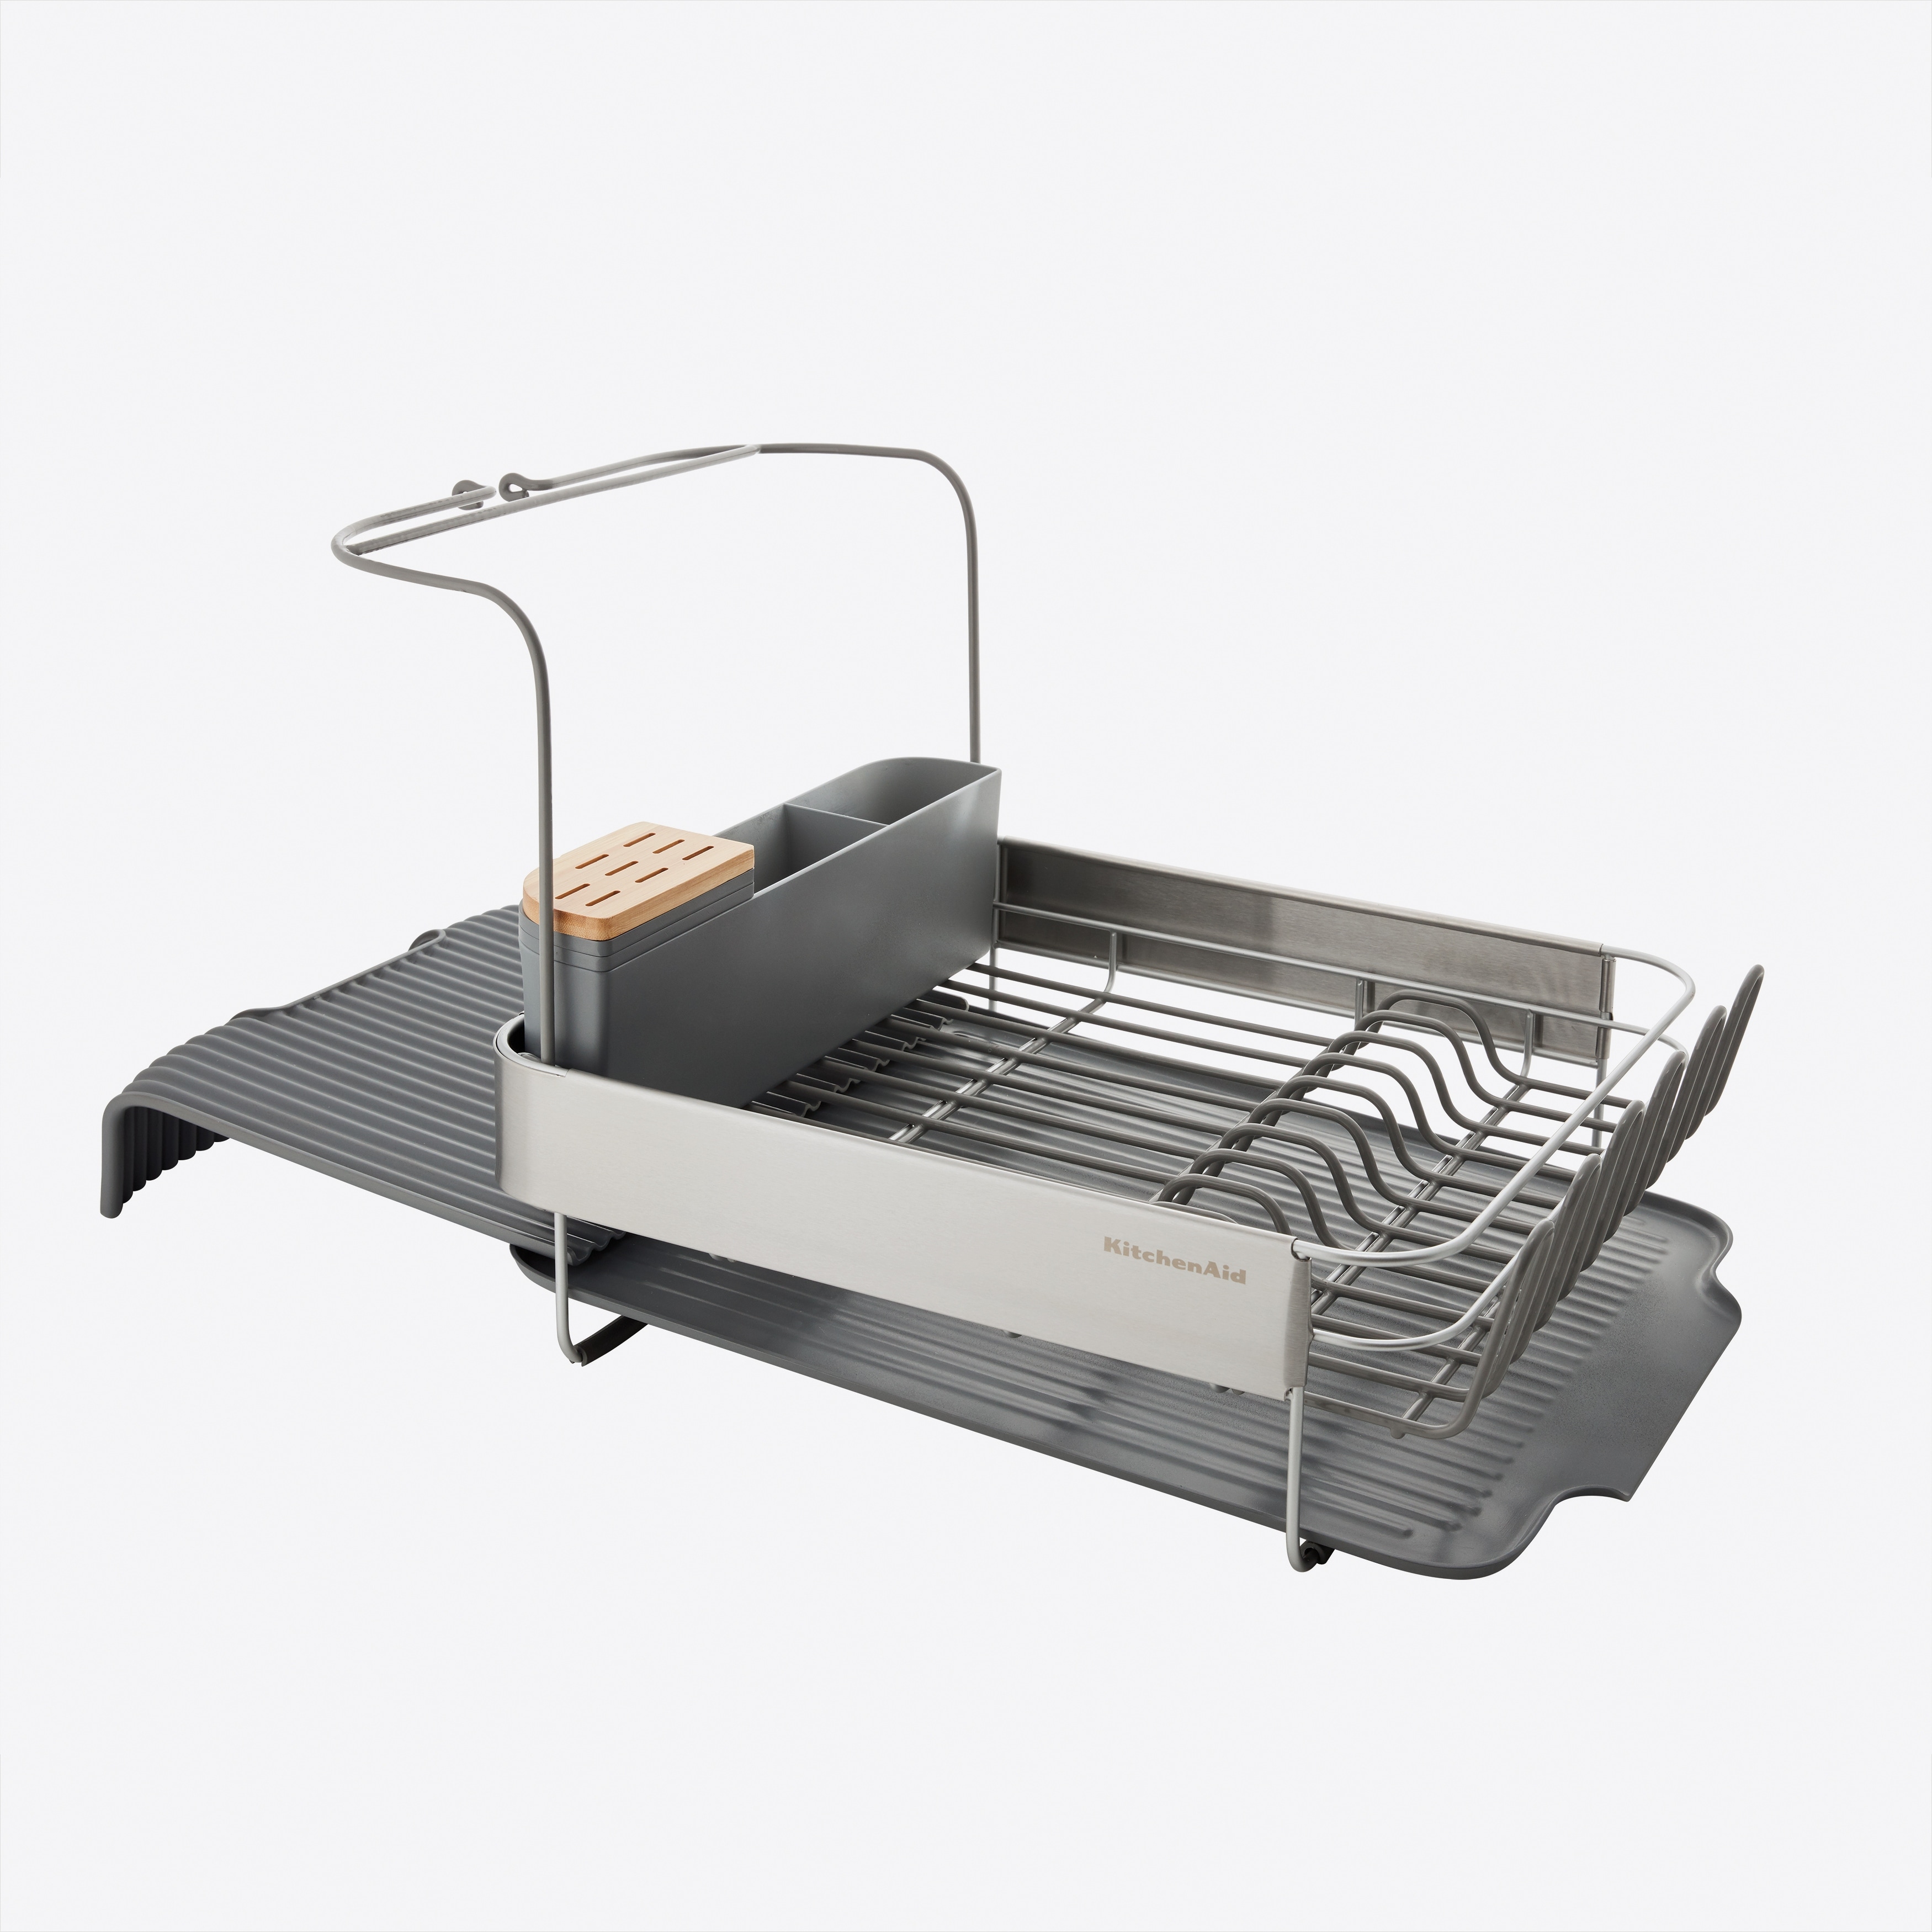 https://ak1.ostkcdn.com/images/products/is/images/direct/58e1b65fcf1bb292d75daa4303d5bcfd330a0328/KitchenAid-Full-Size-Expandable-Dish-Drying-Rack%2C-24-Inch.jpg